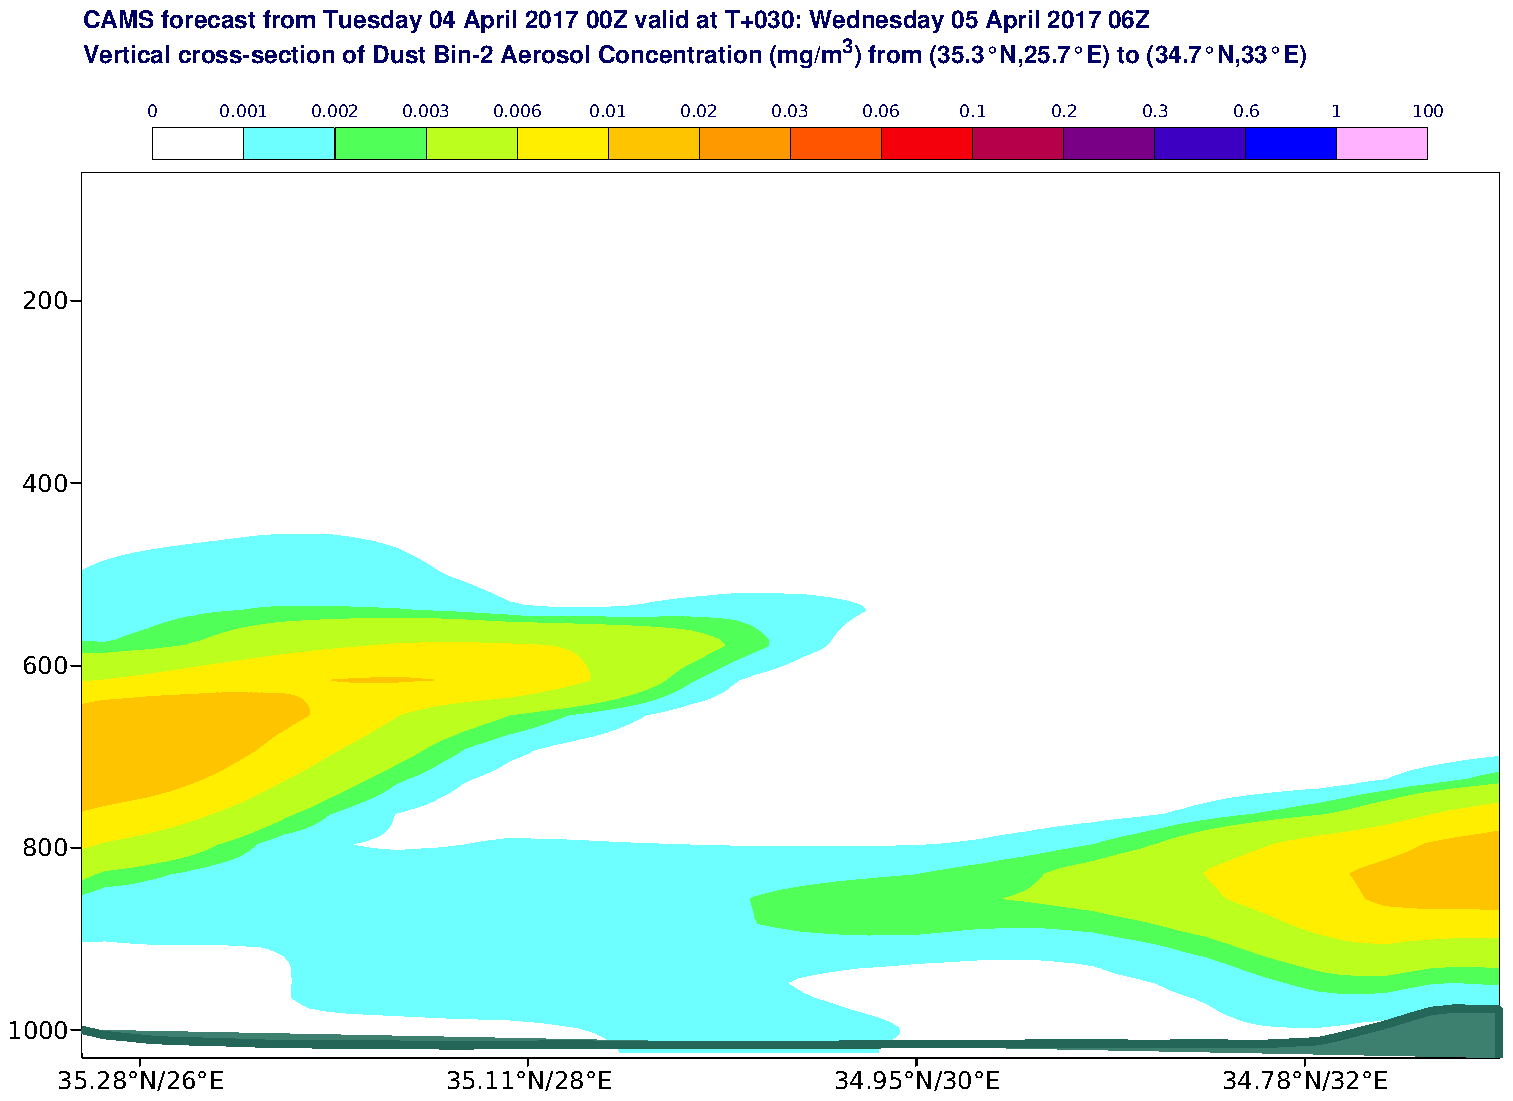 Vertical cross-section of Dust Bin-2 Aerosol Concentration (mg/m3) valid at T30 - 2017-04-05 06:00